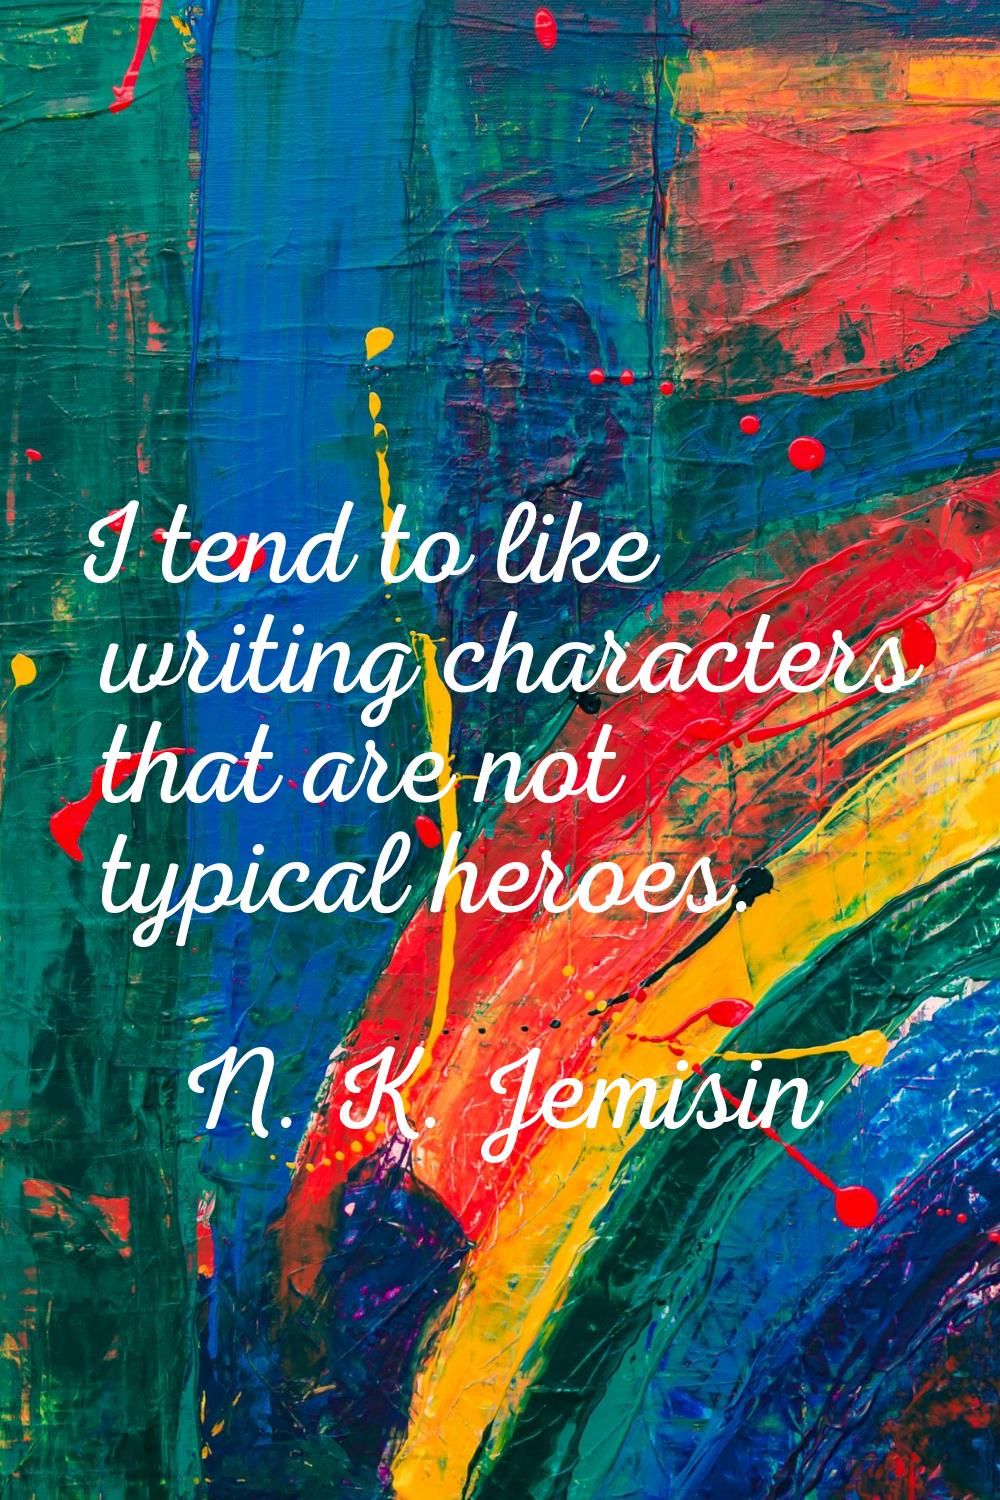 I tend to like writing characters that are not typical heroes.